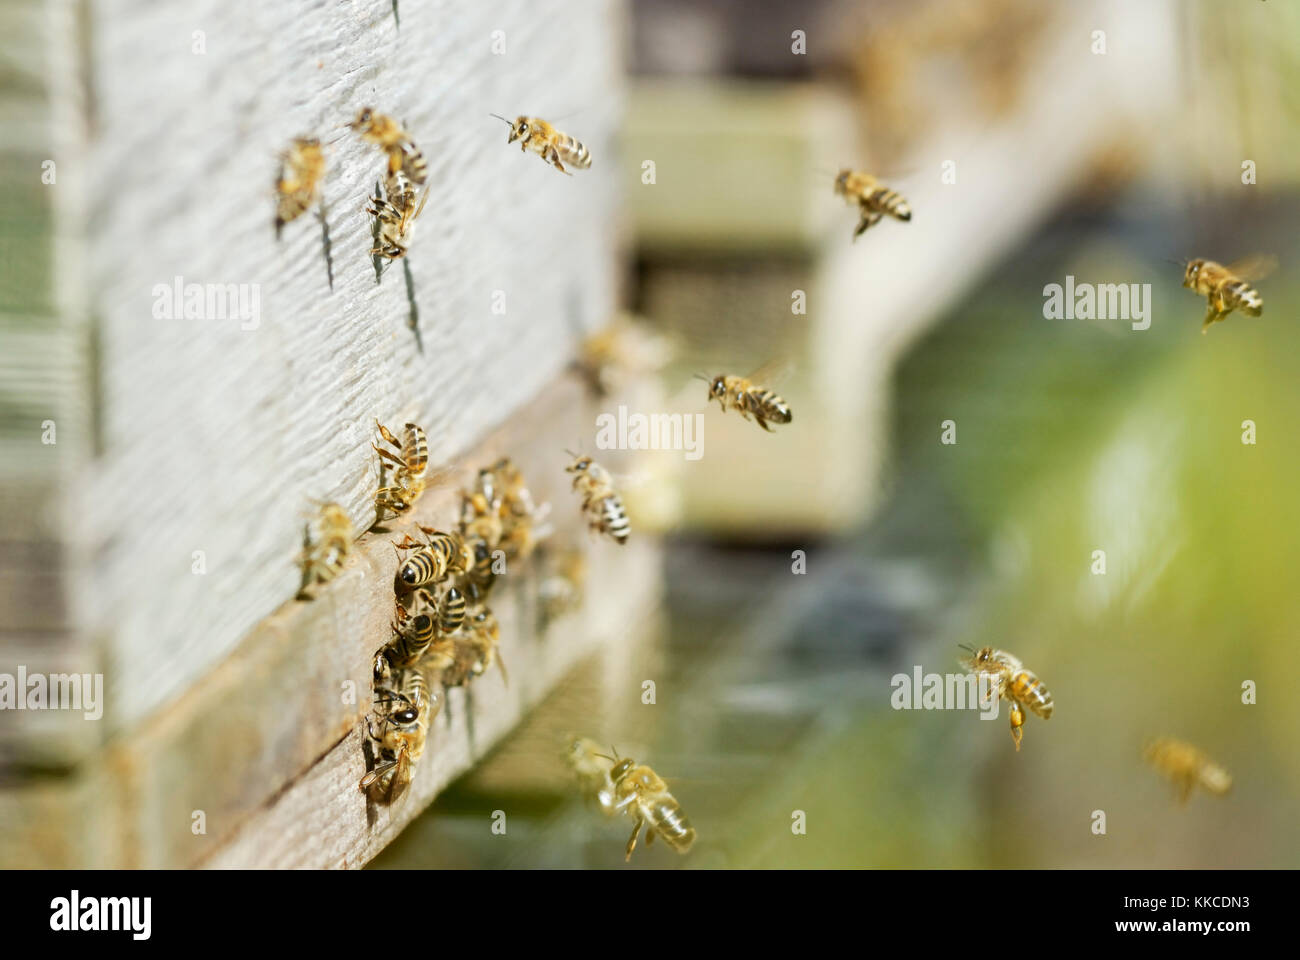 Close up of Honey Bees, Apis mellifera, entering and leaving the hive, Wales, UK. Stock Photo